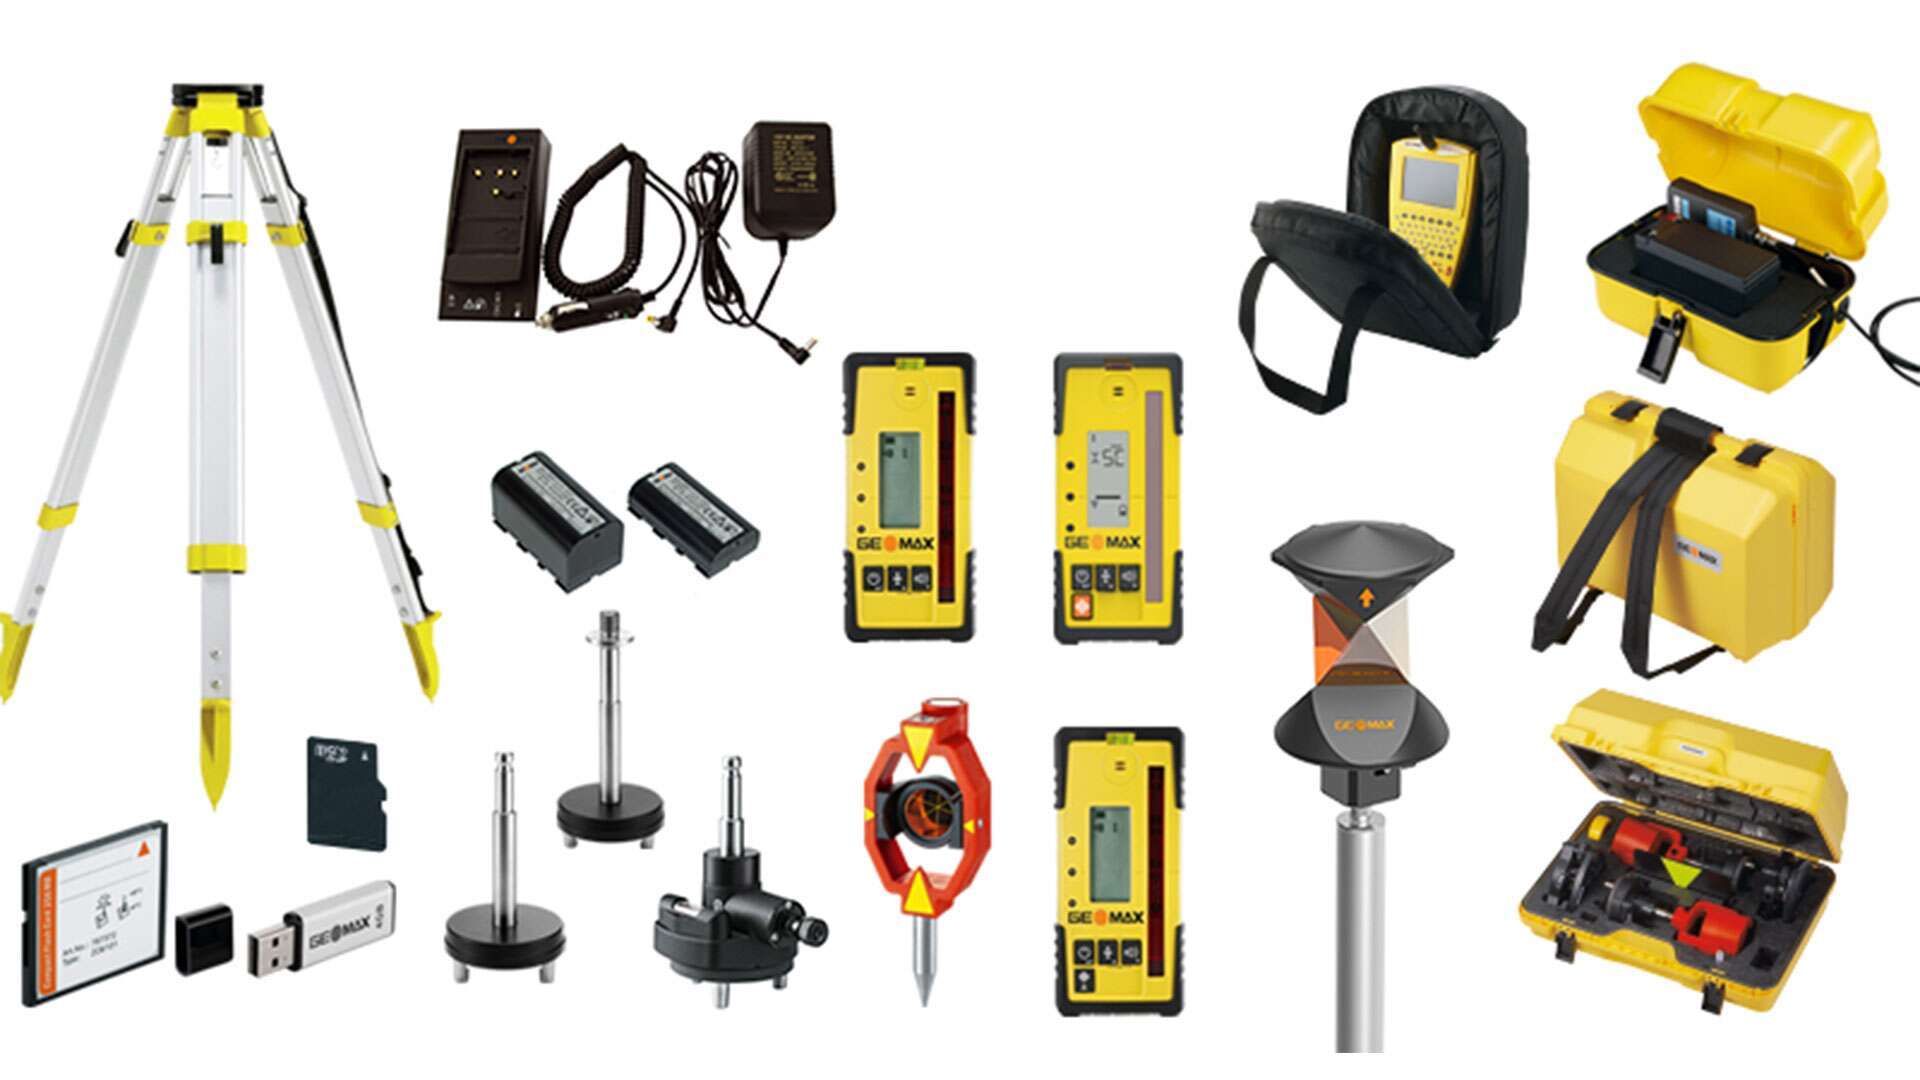 Surveying Instruments And Their Uses